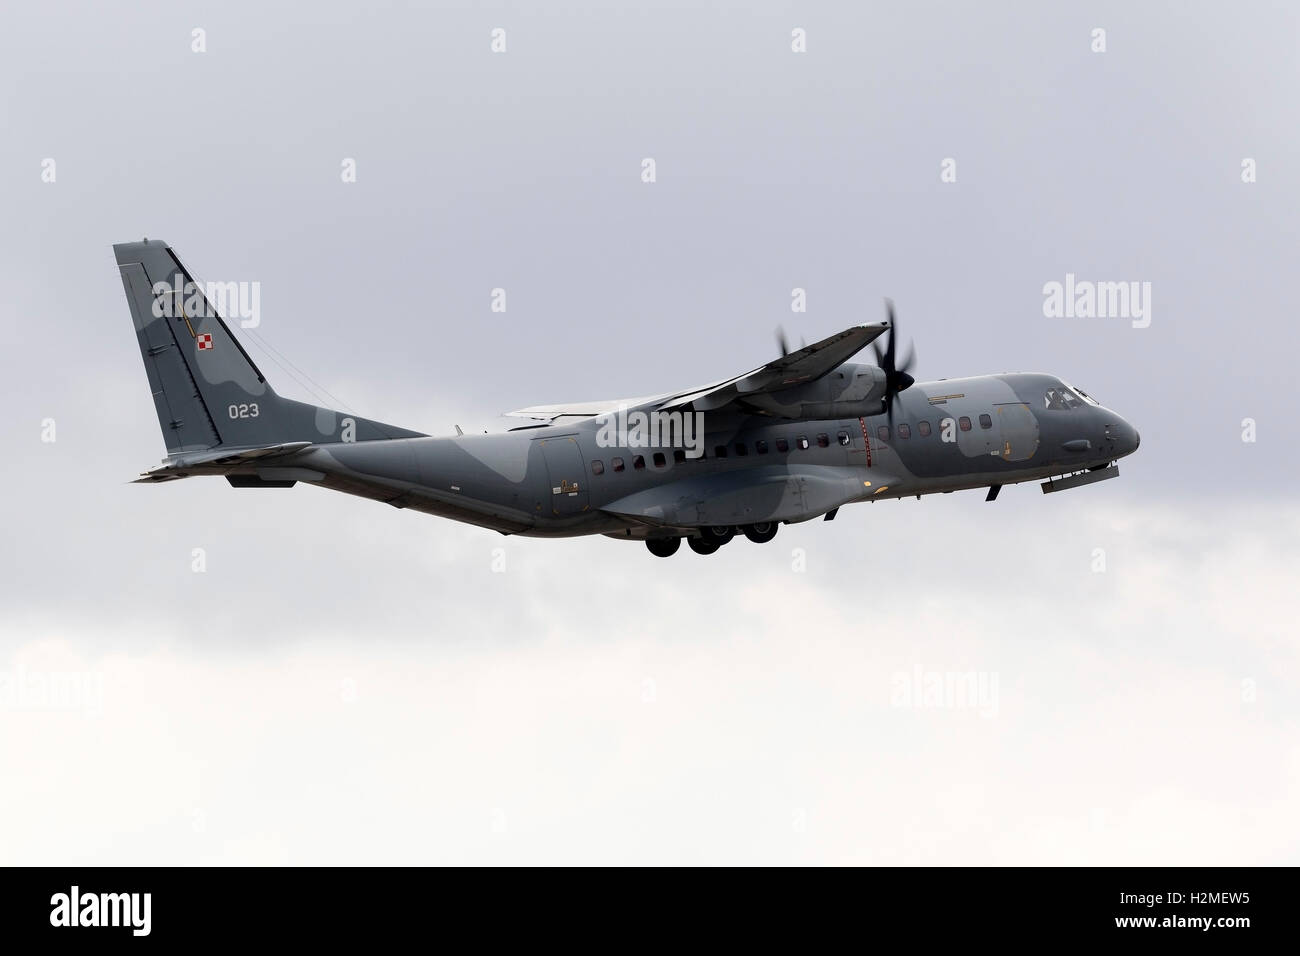 Polish Air Force CASA C-295M [023] support aircraft for the Polish Team attending the airshow departing runway 05. Stock Photo